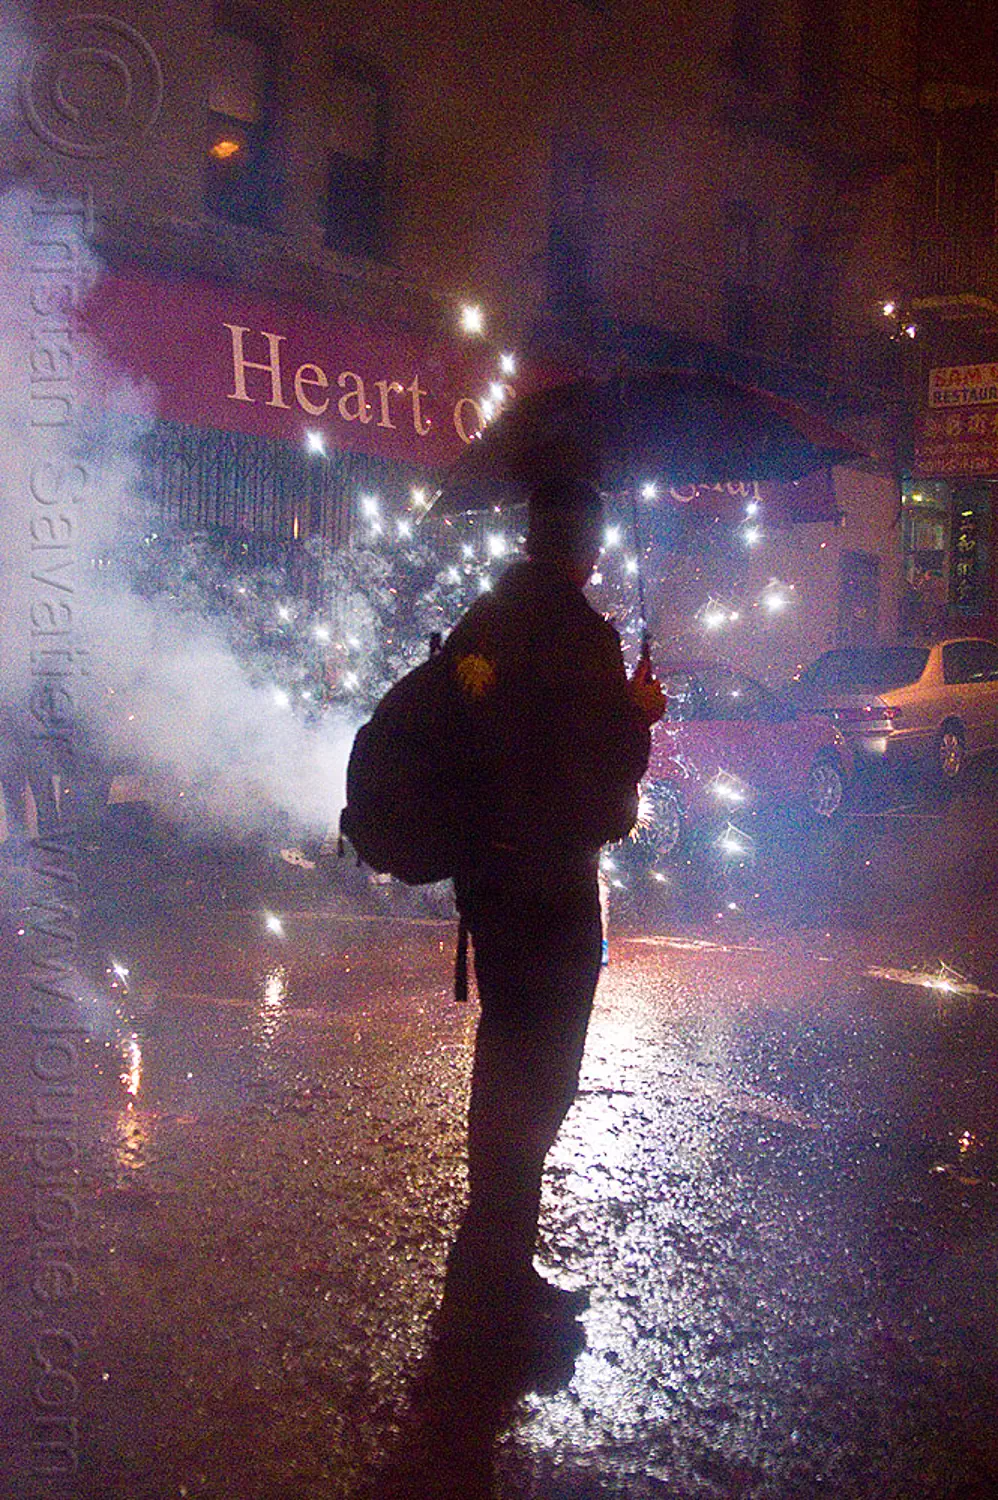 chinese new year in chinatown (san francisco), backlight, backpack, chinatown bang, chinese new year, firecrackers, grant st, heart of shanghai, lunar new year, man, night, pyrotechnics, silhouette, smoke, sparks, umbrella